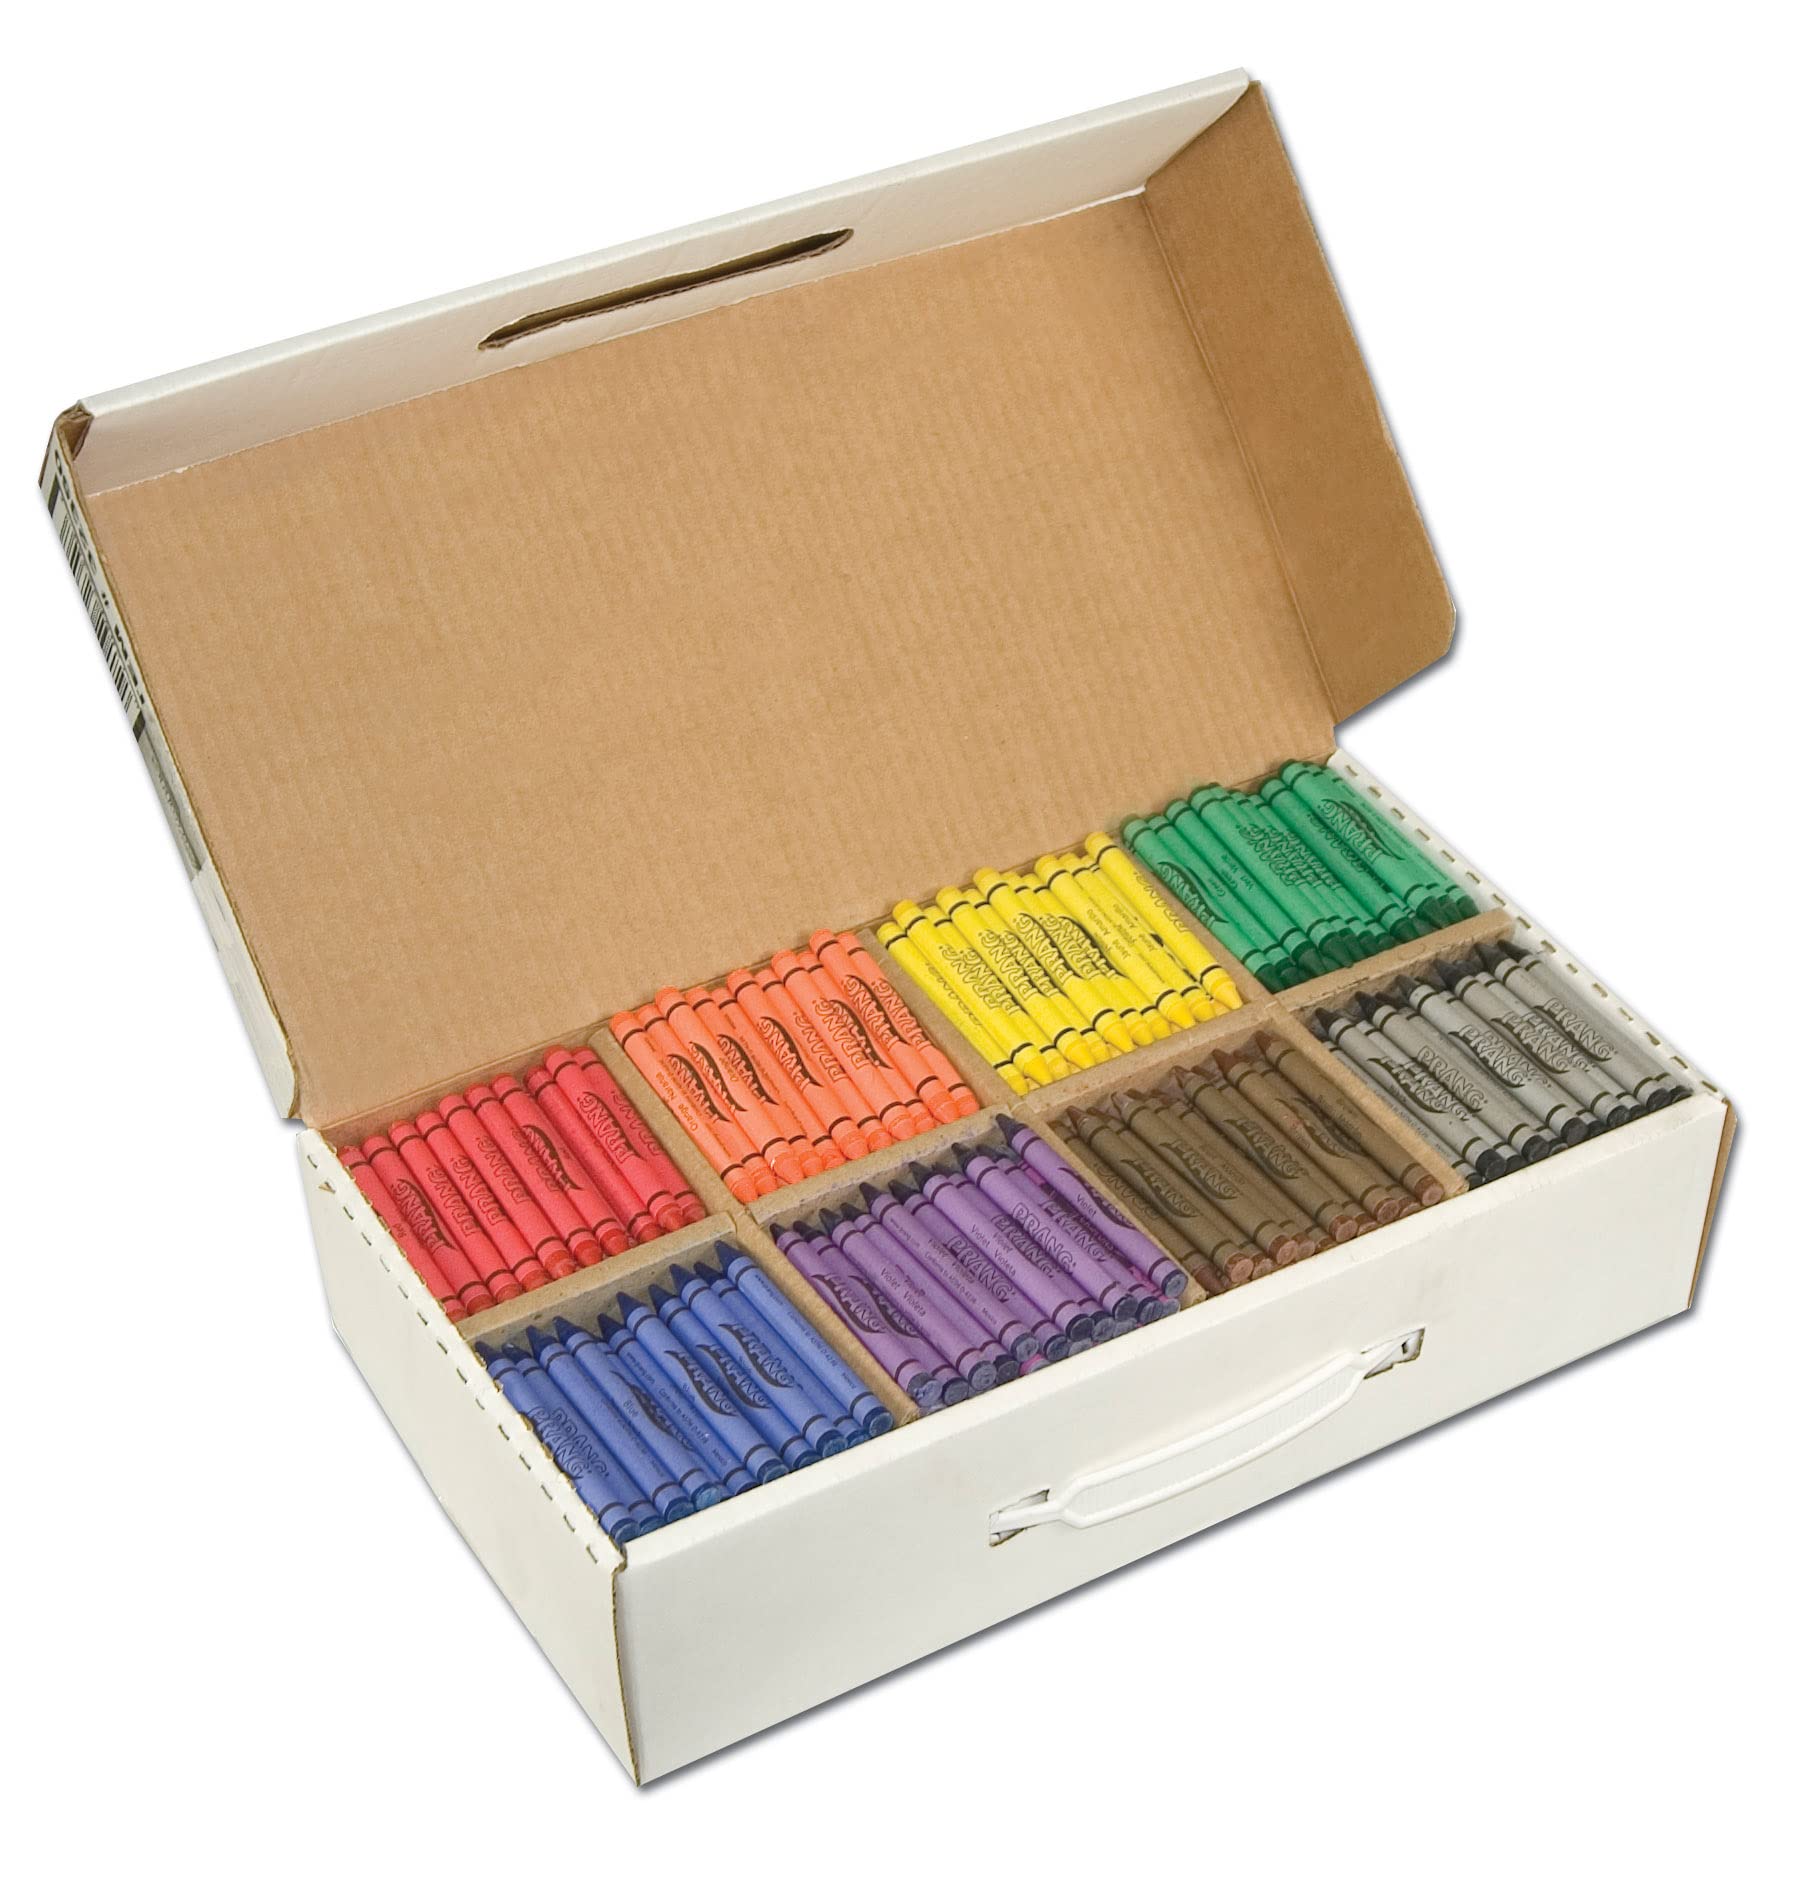 Prang Crayons Made With Soy, 100 Each Of 8 Colors, 800/carton